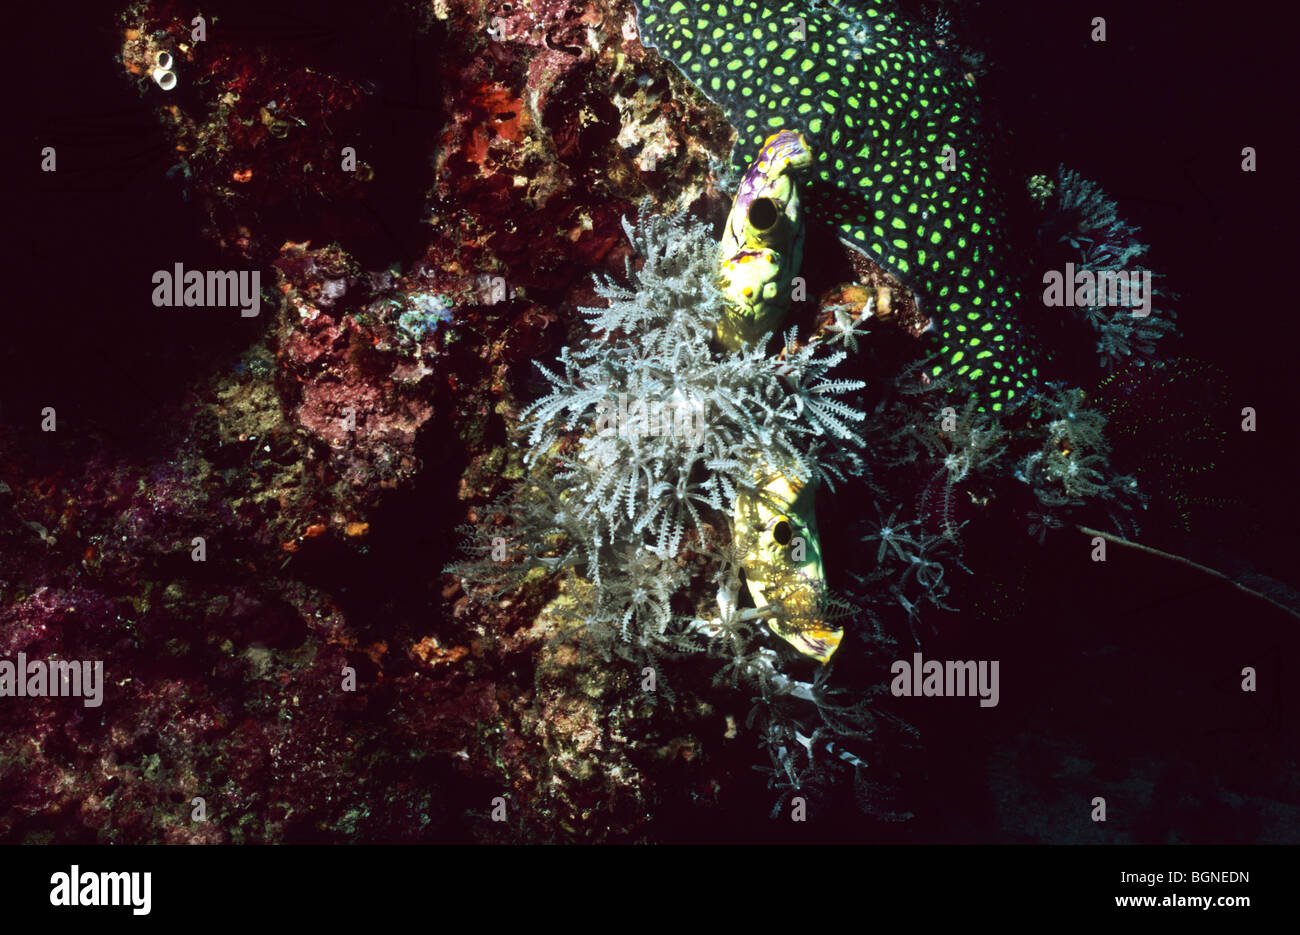 Coral and Sea Squirts. Amazing underwater marine life in the Flores sea, near Komodo. Indonesia. Stock Photo